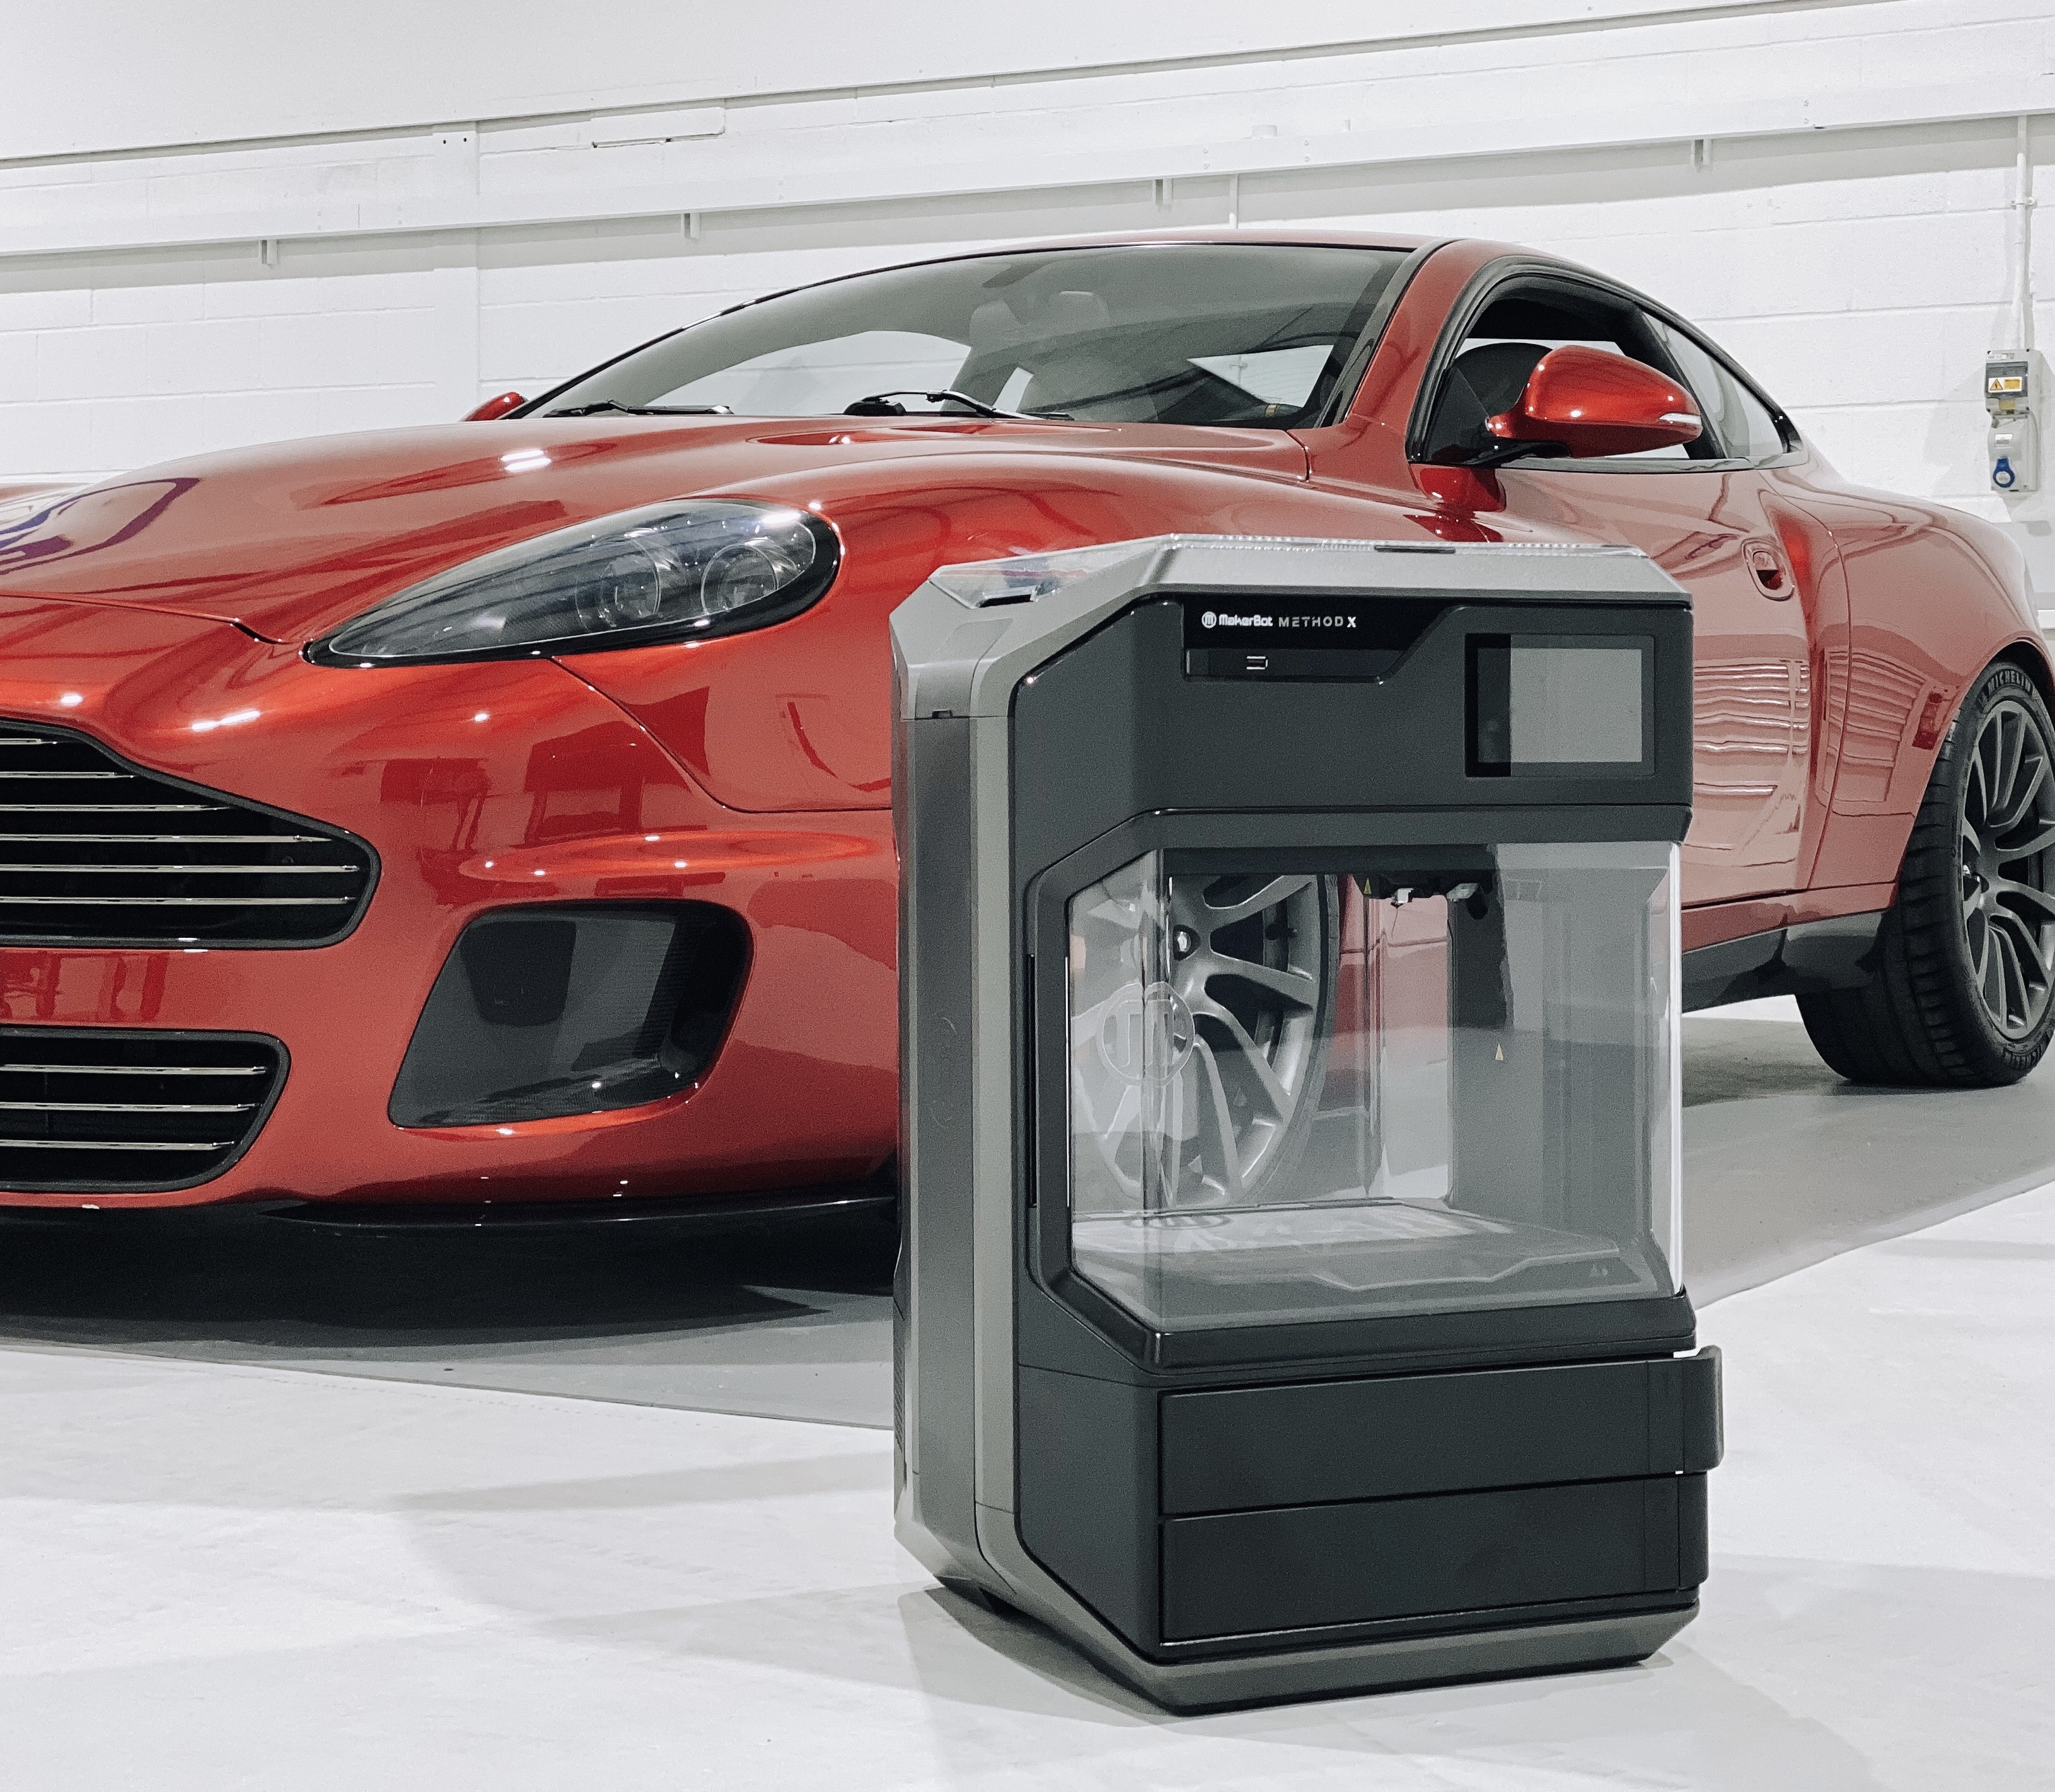 Featured image shows MakerBot's METHOD X 3D printer next to the new R-Reforged Aston Martin CALLUM 25 supercar. Photo via Makerbot.